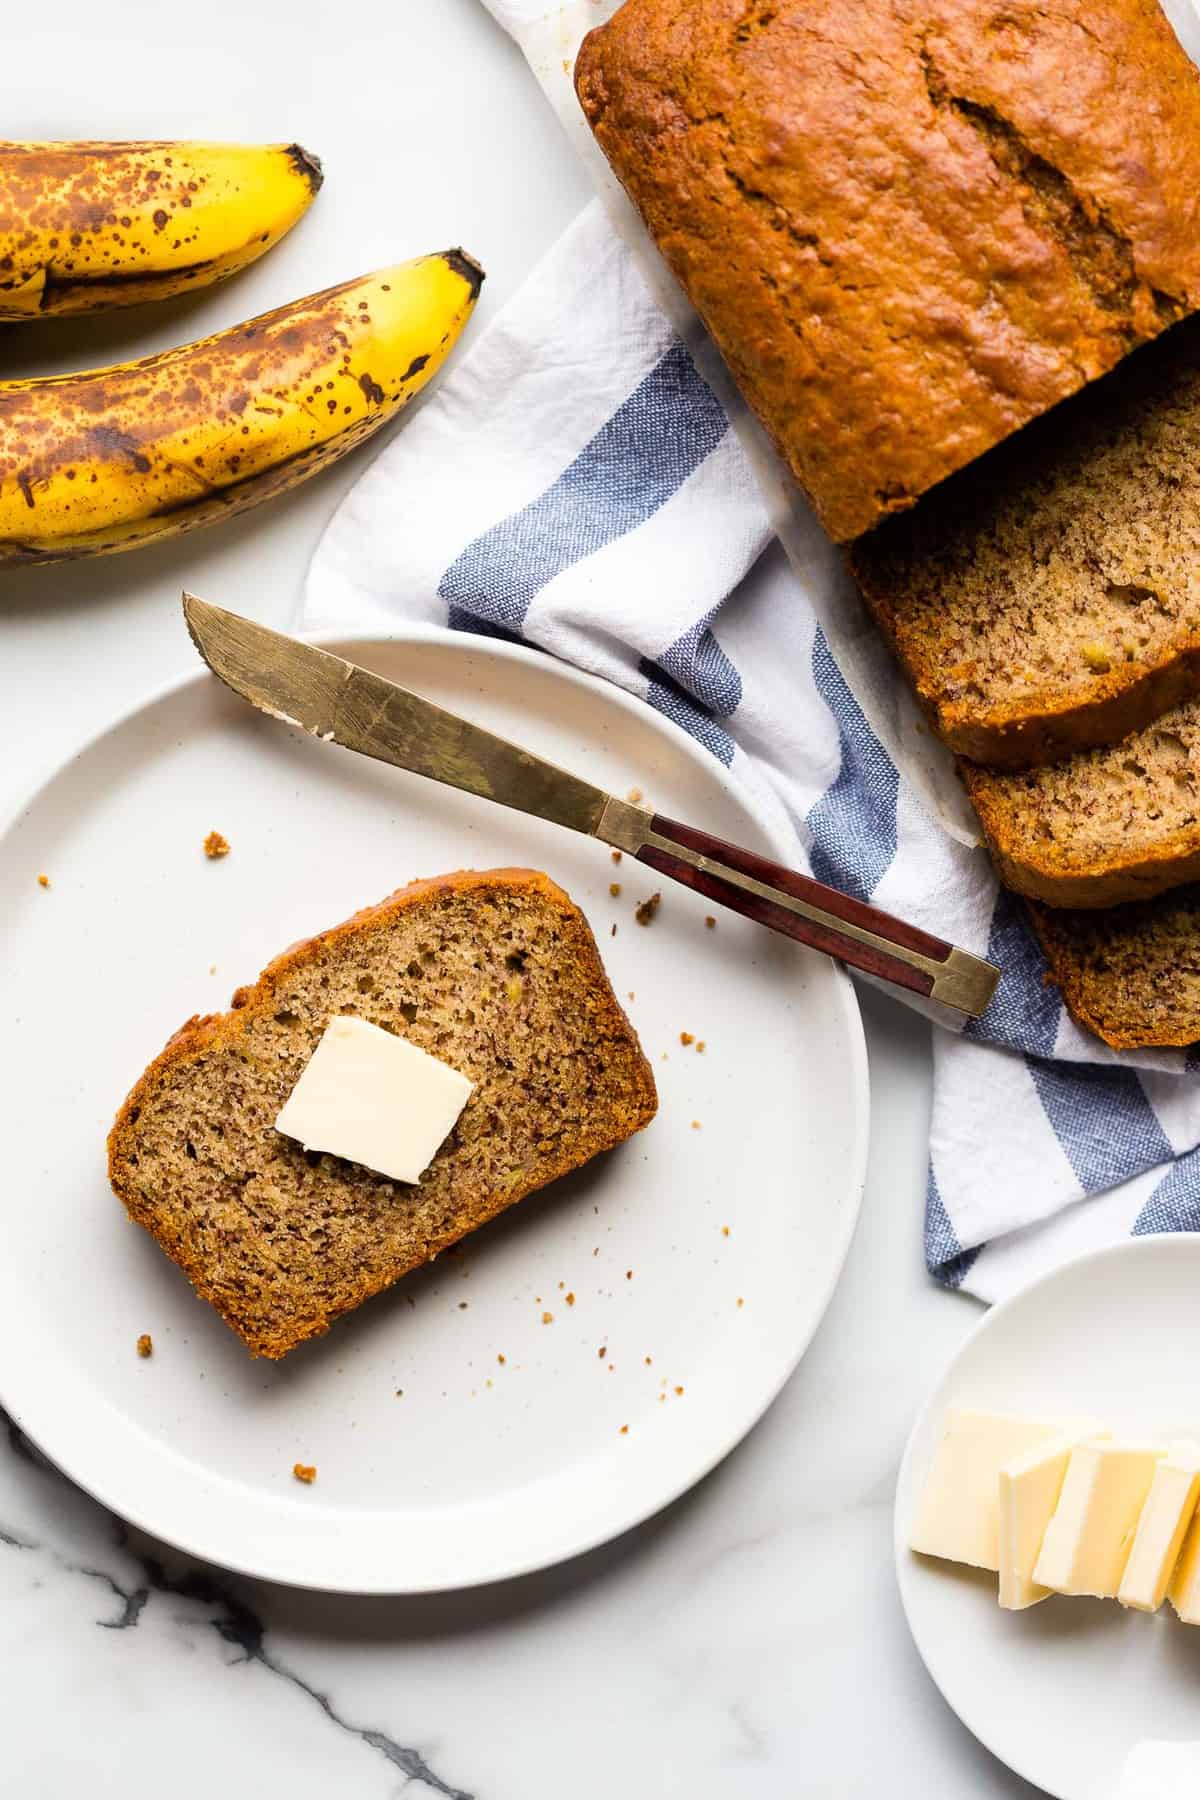 A slice a vegan banana bread on a plate with a pat of vegan butter.